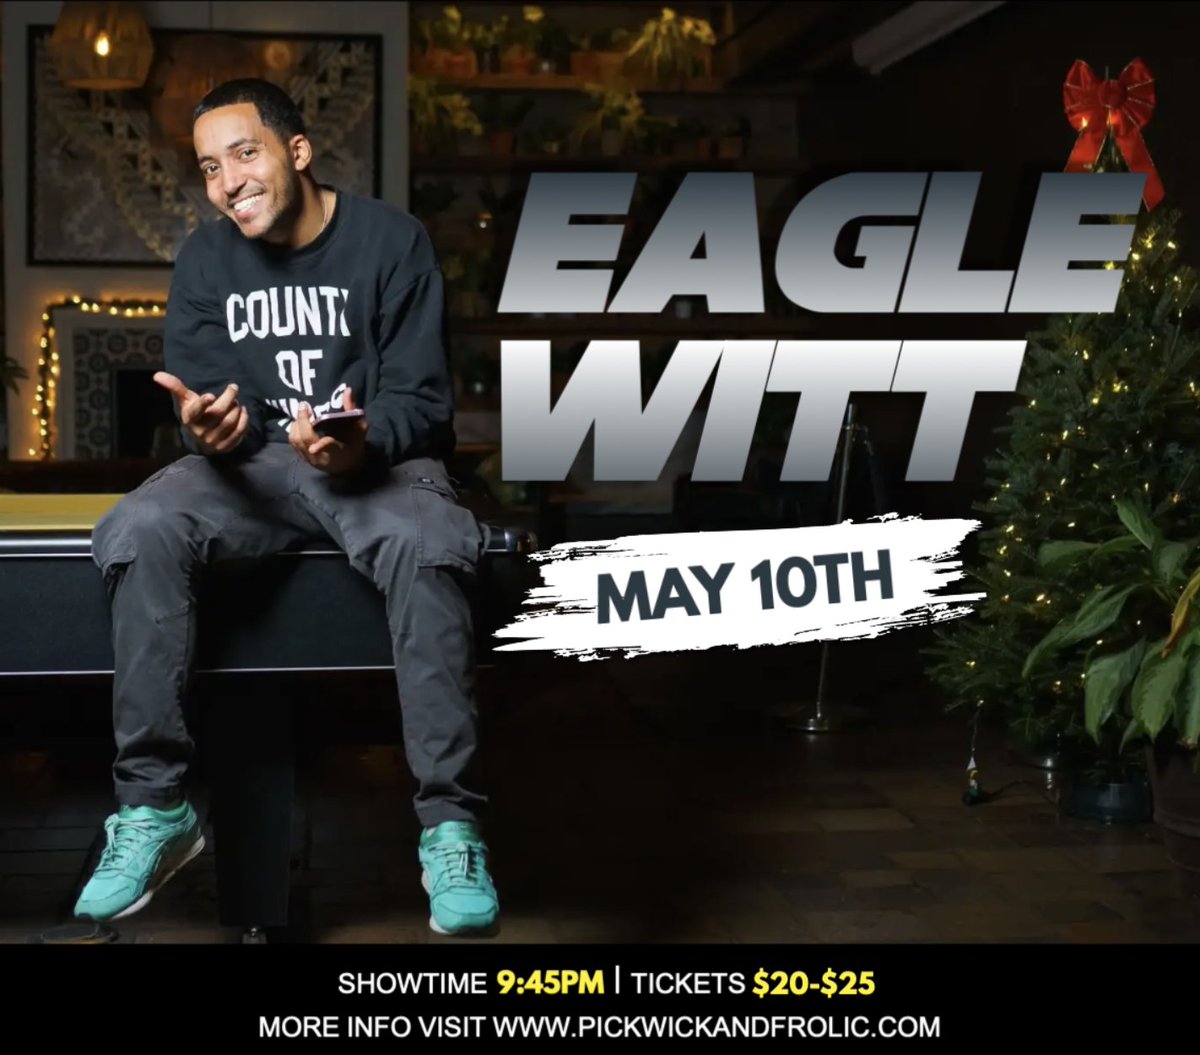 ICYMI: Eagle Witt takes on the main stage May 10th at 9:45PM. Eagle has been featured on Comedy Central’s THIS WEEK AT THE COMEDY CELLAR as well as Amazon’s scripted series MILLENNIUMS. He has notably performed twice on COMEDY CENTRAL’S STAND UP, with his most recent set having